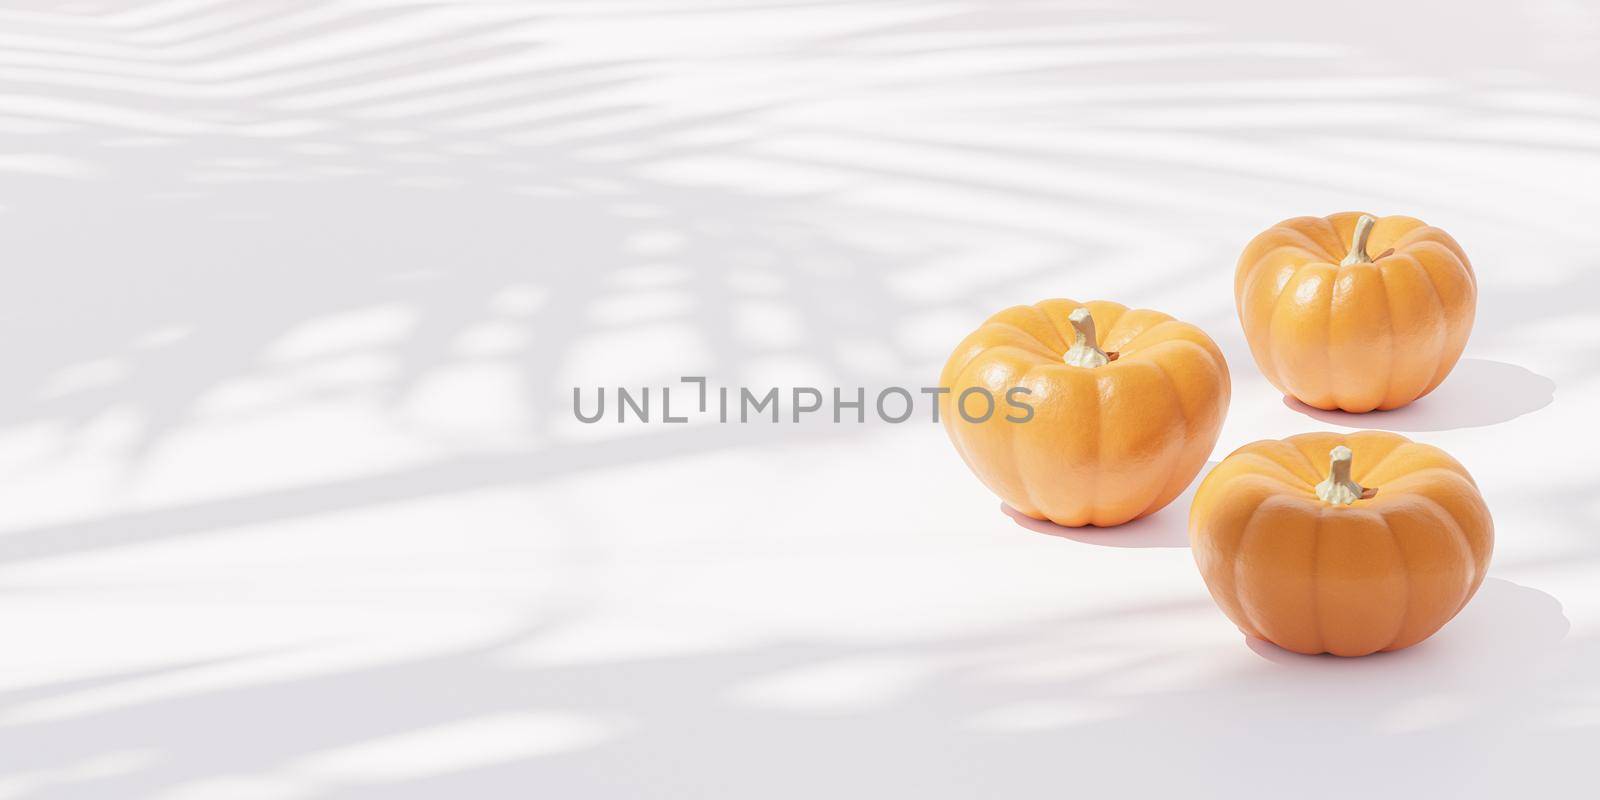 Pumpkins on white background for advertising on autumn holidays or sales, 3d banner render by Frostroomhead